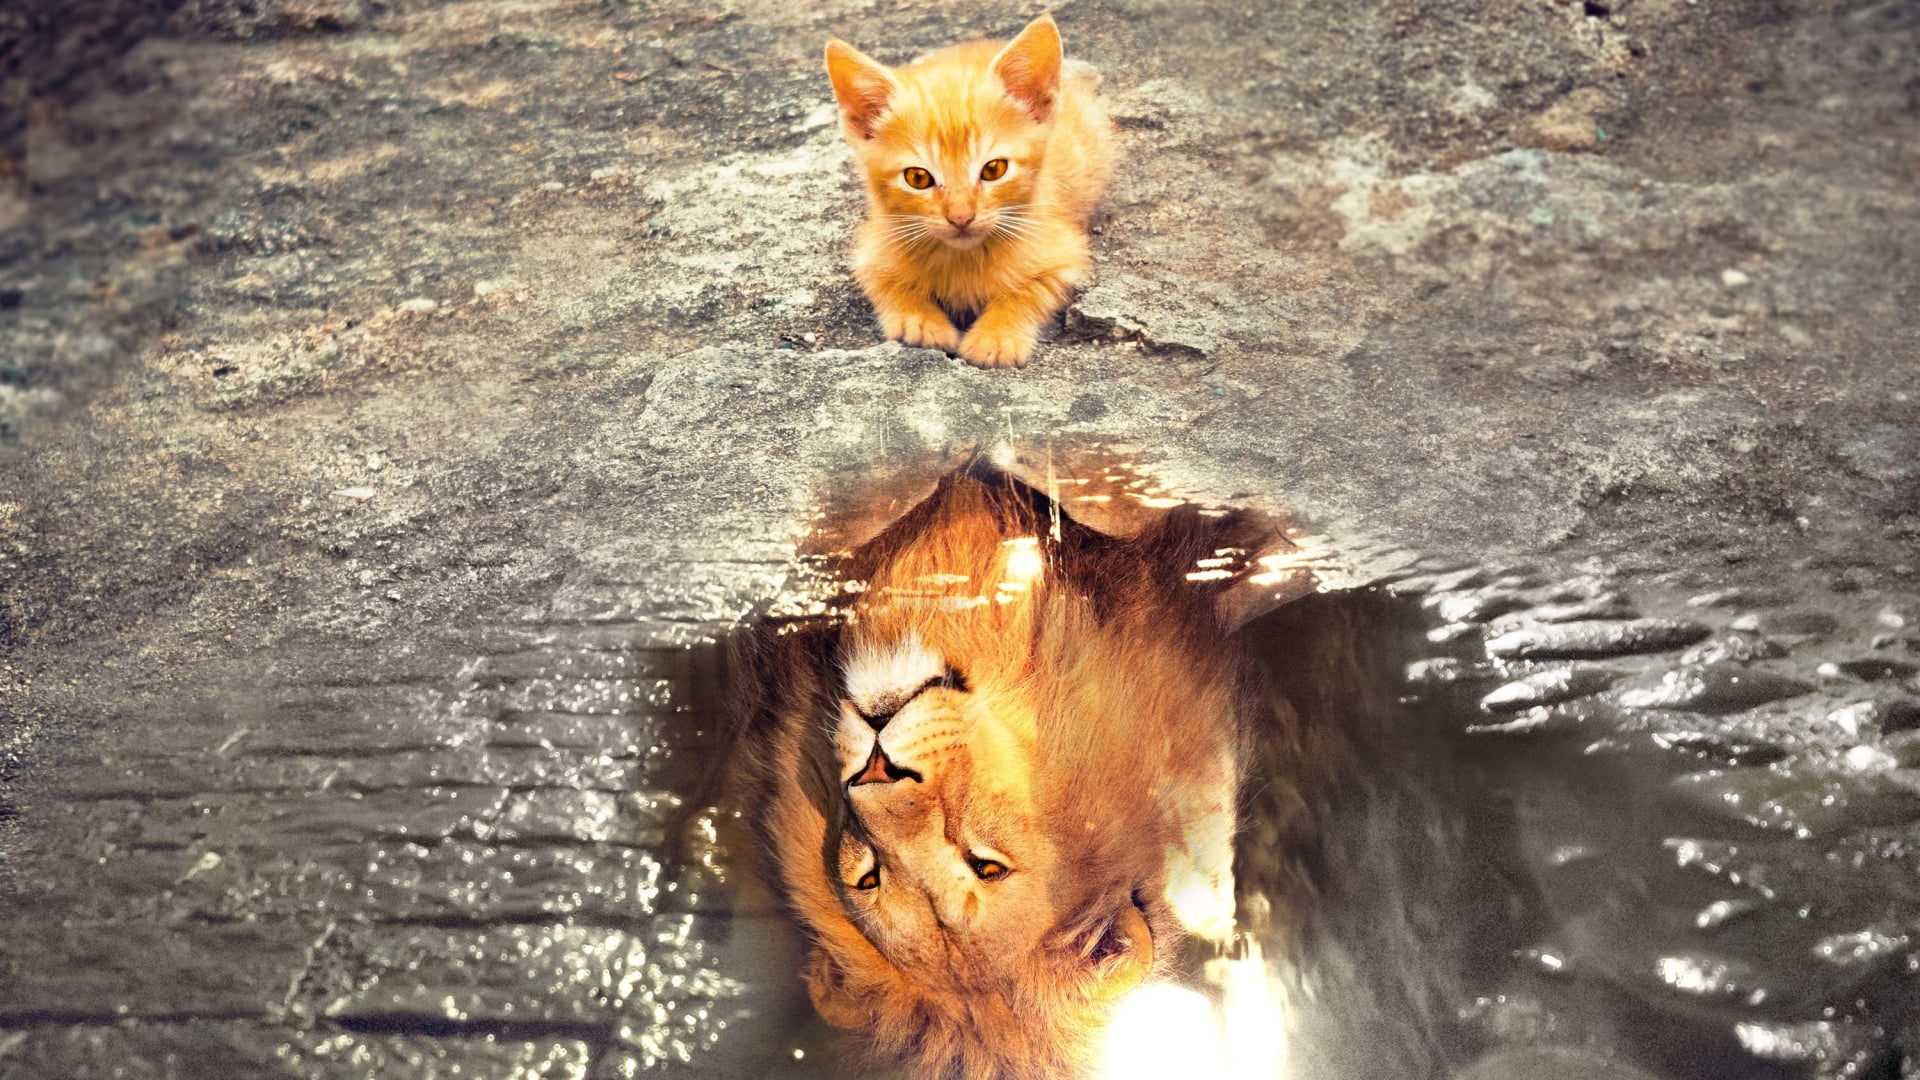 nature, animals, cats, kittens, lion, wild cat, water, reflection